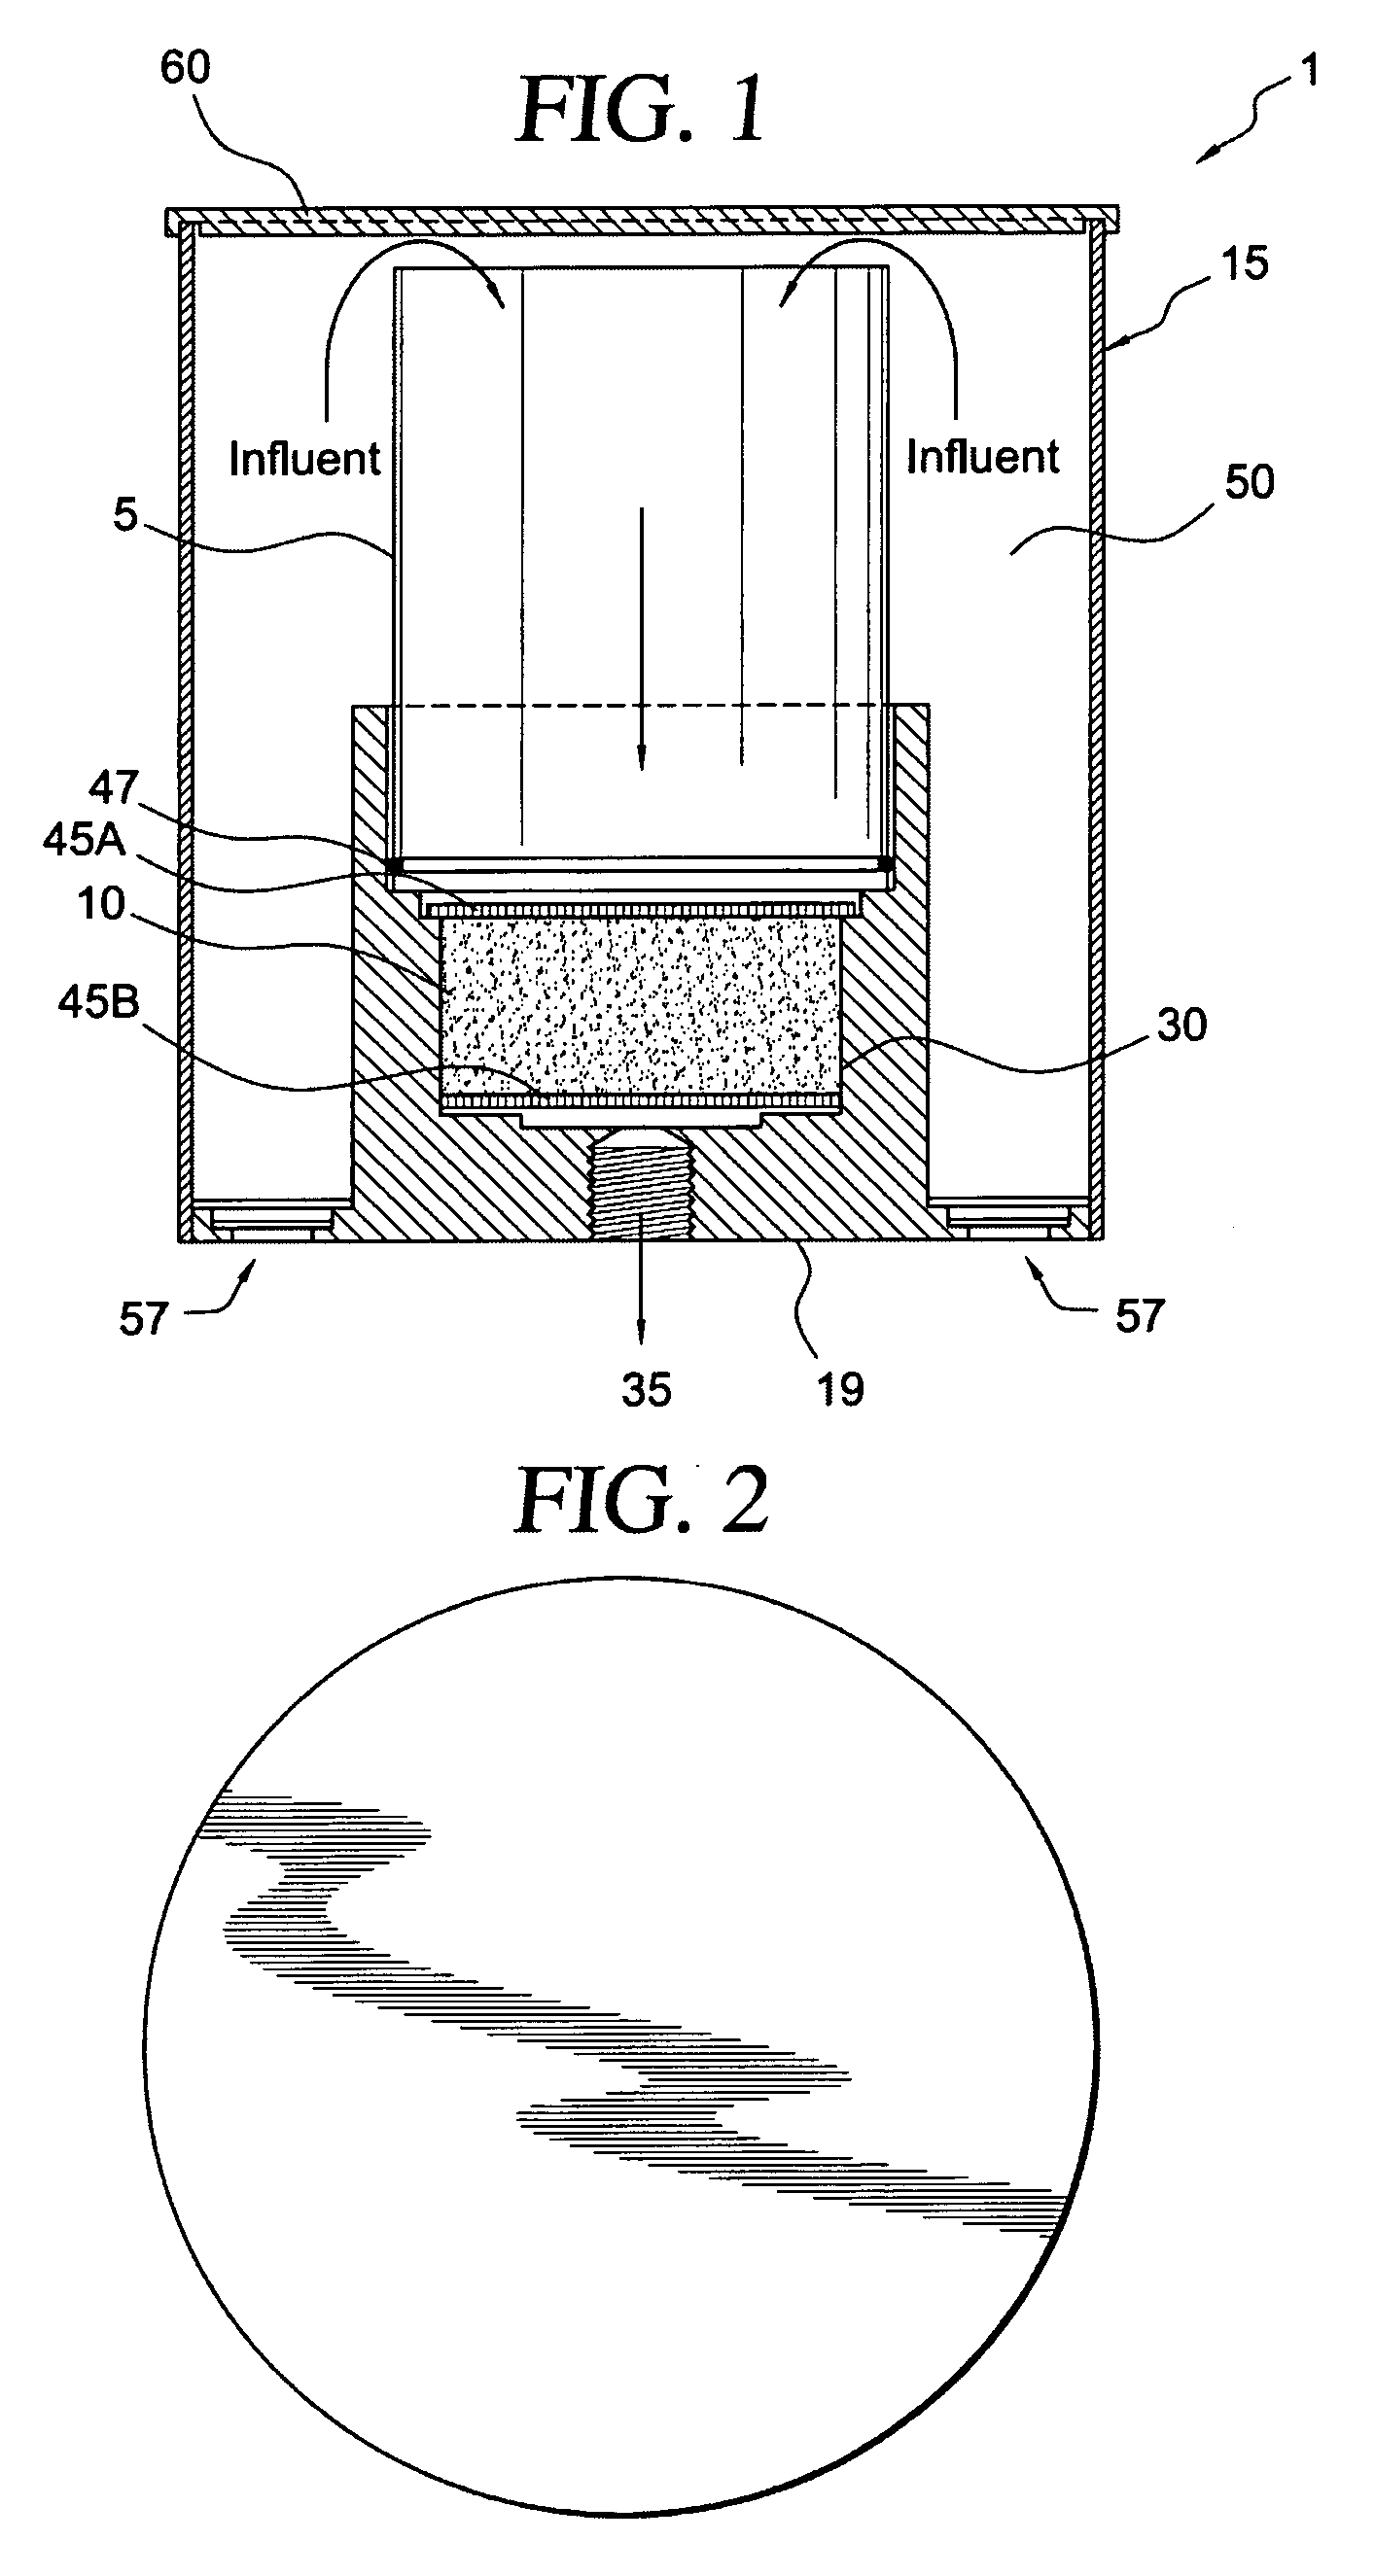 Microfiltration devices